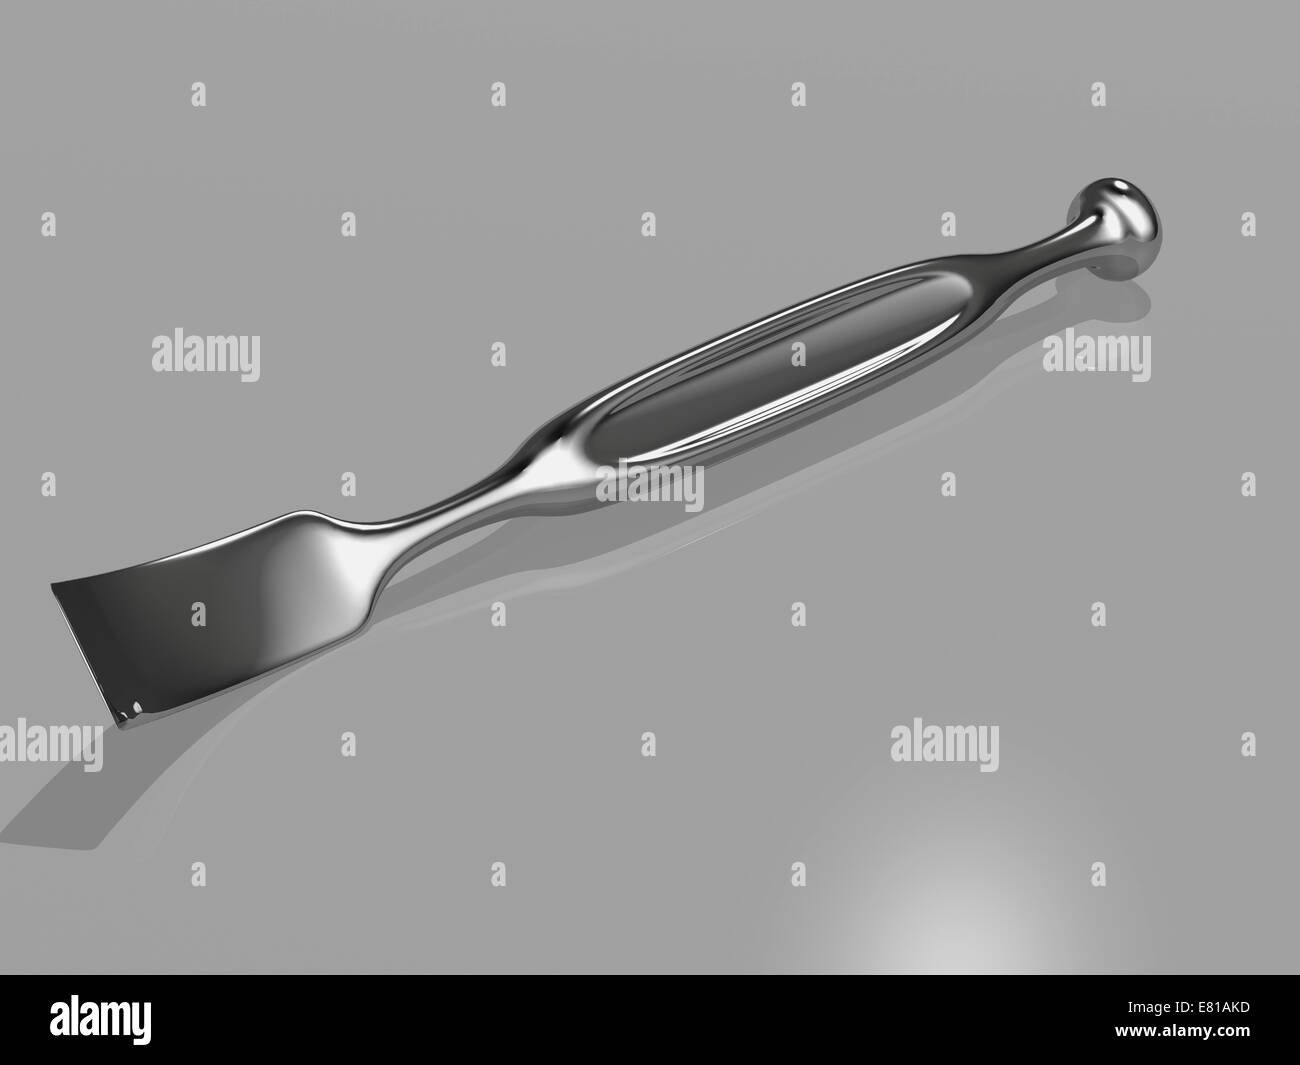 A metal chisel tool with a cutting edge at the end of a blade, used in dentistry. Stock Photo